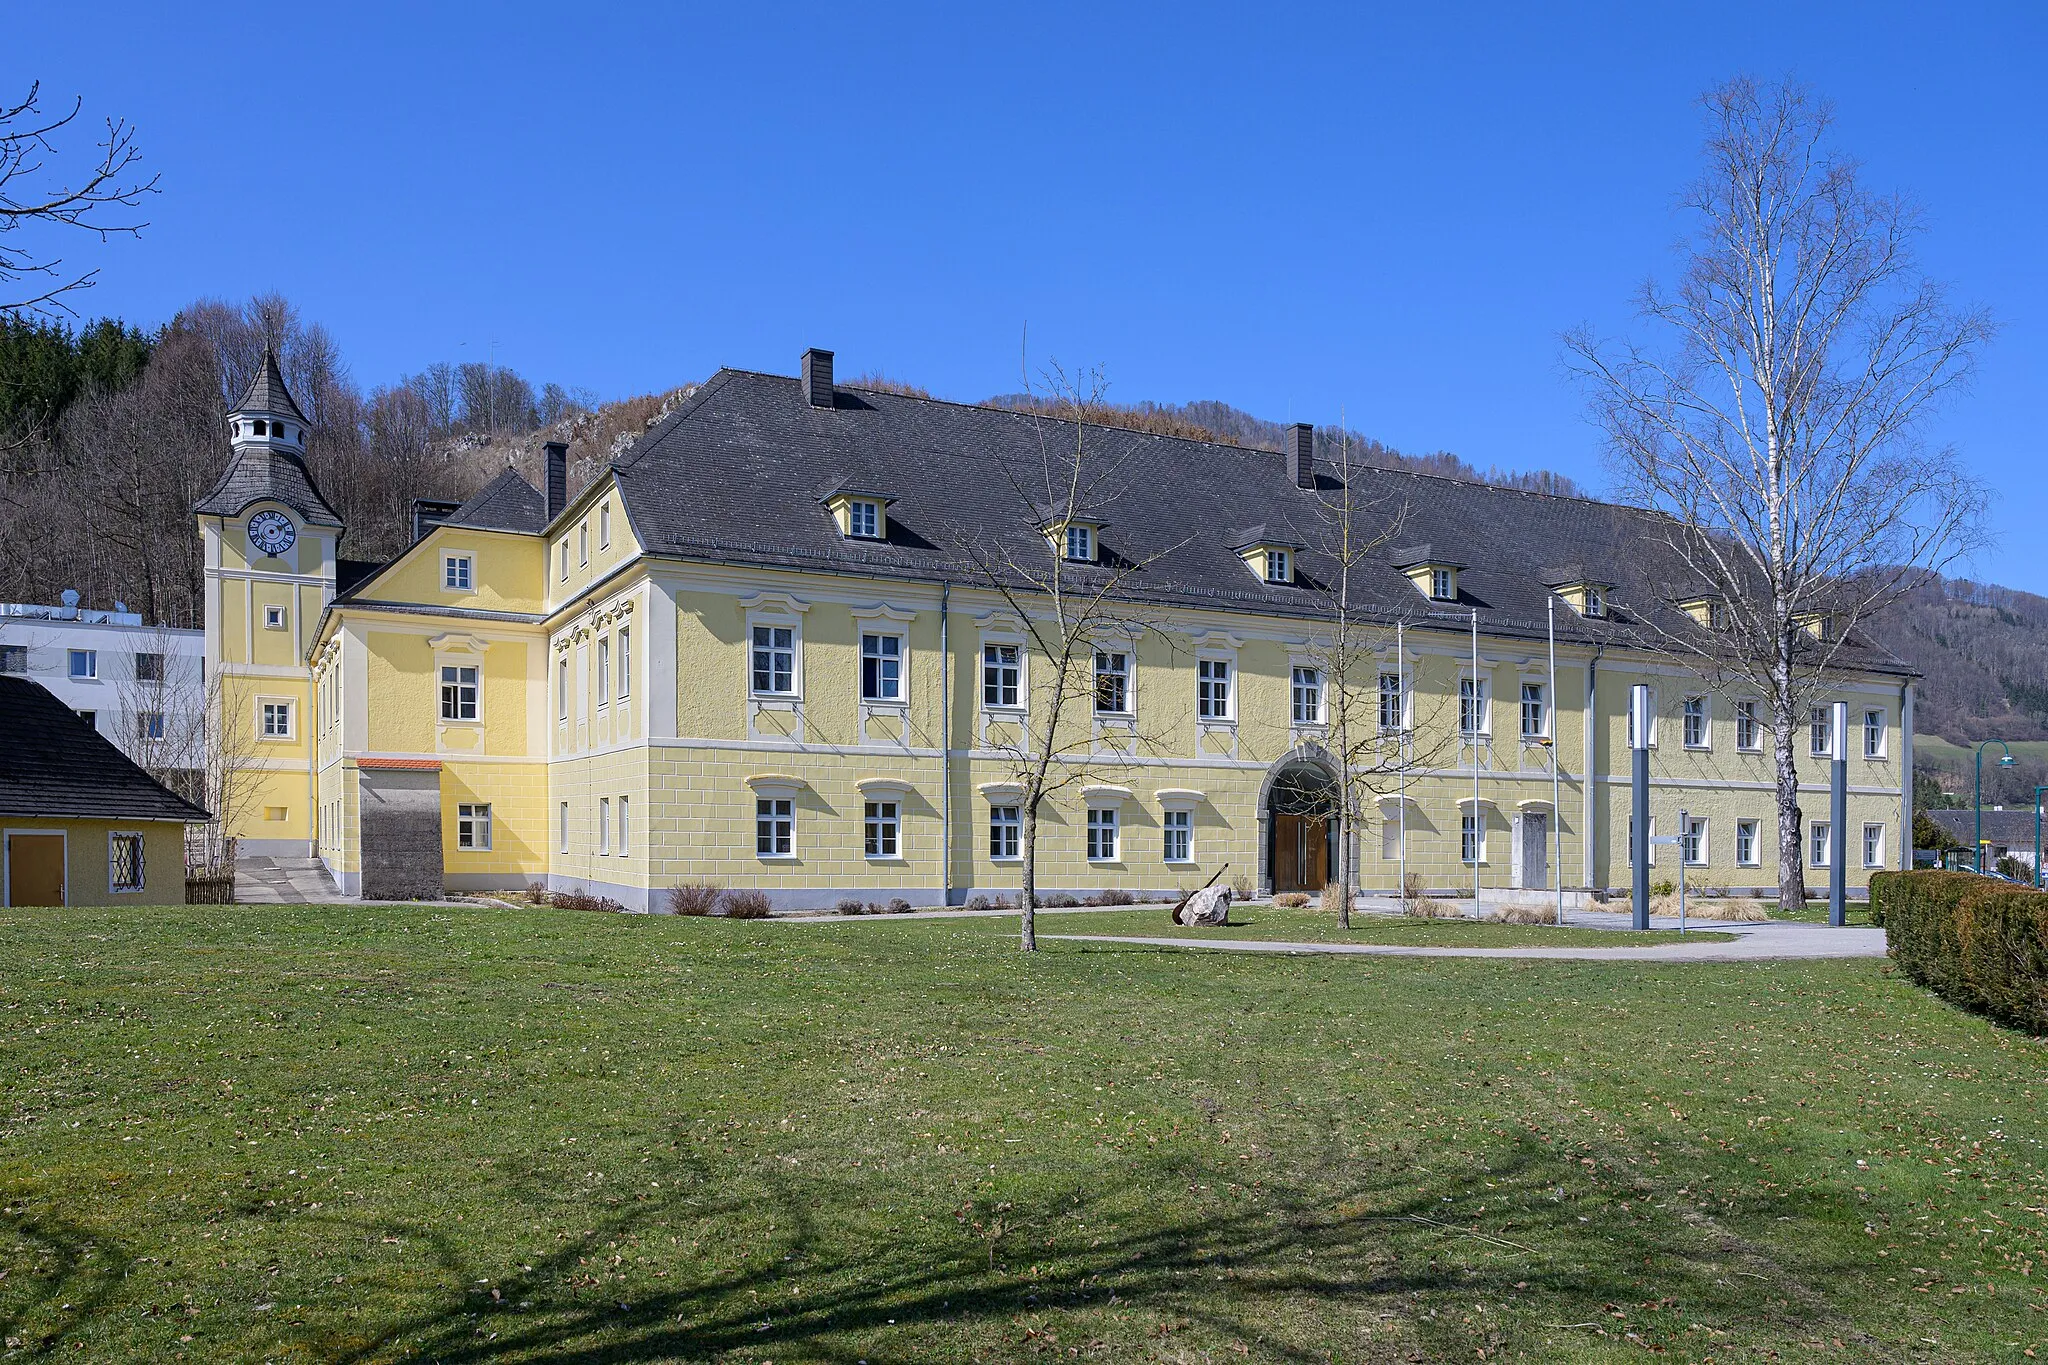 Photo showing: Leonstein Castle in Priethal, Grünburg municipality, was rebuilt in the baroque style in 1724. Since 1945 it has housed a children's home for the state of Upper Austria.